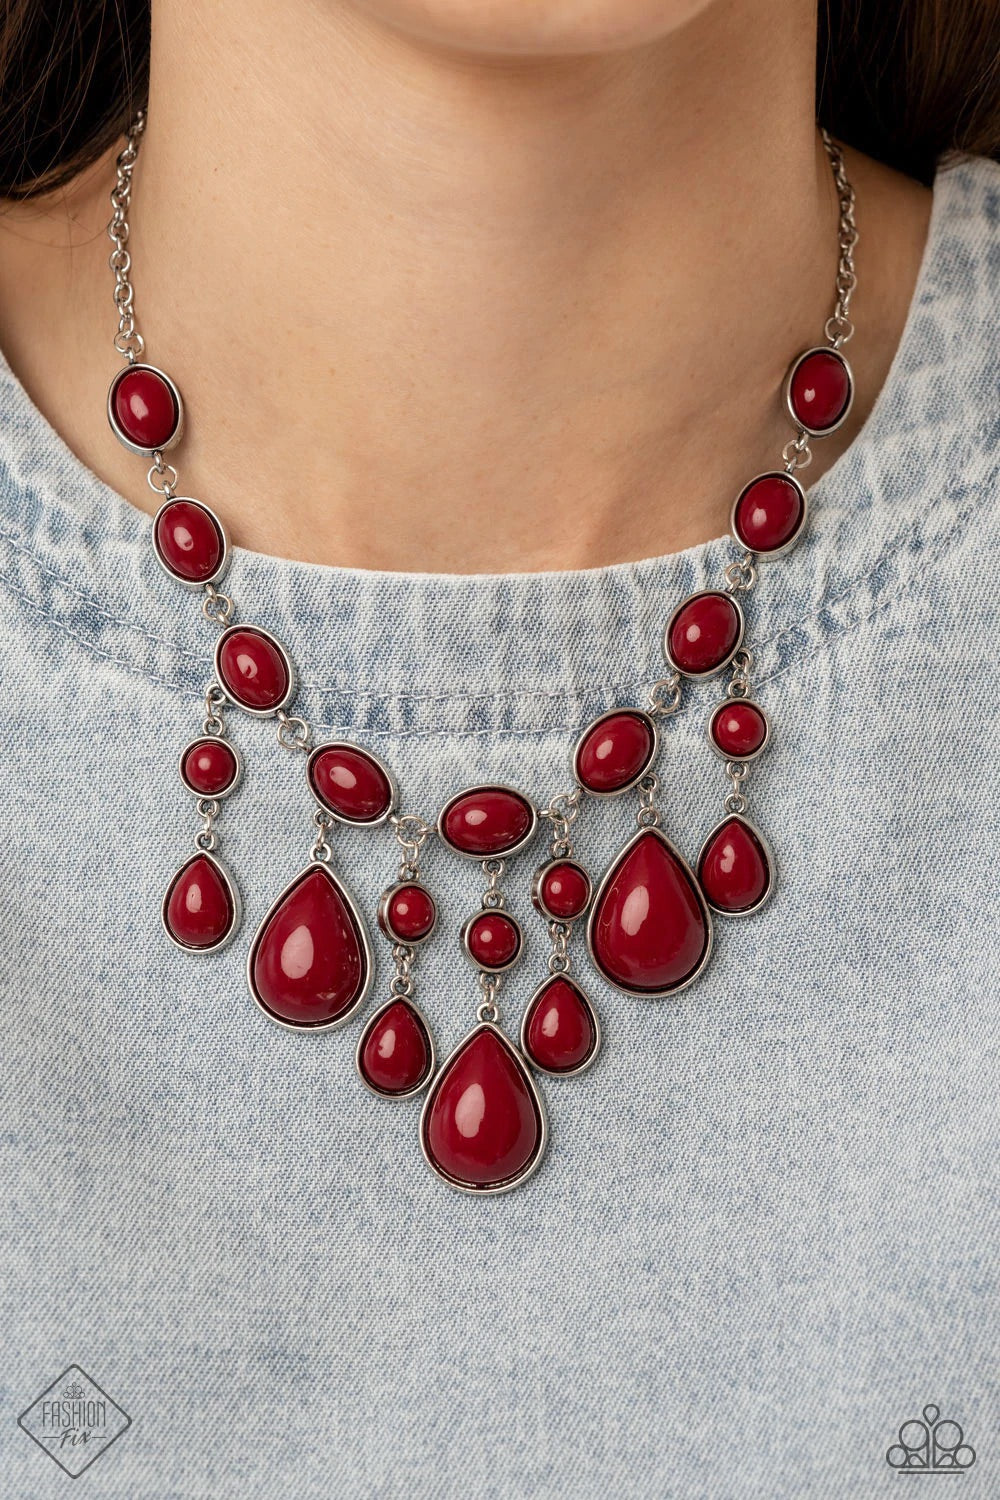 Mediterranean Mystery Paparazzi Accessories Necklace with Earrings